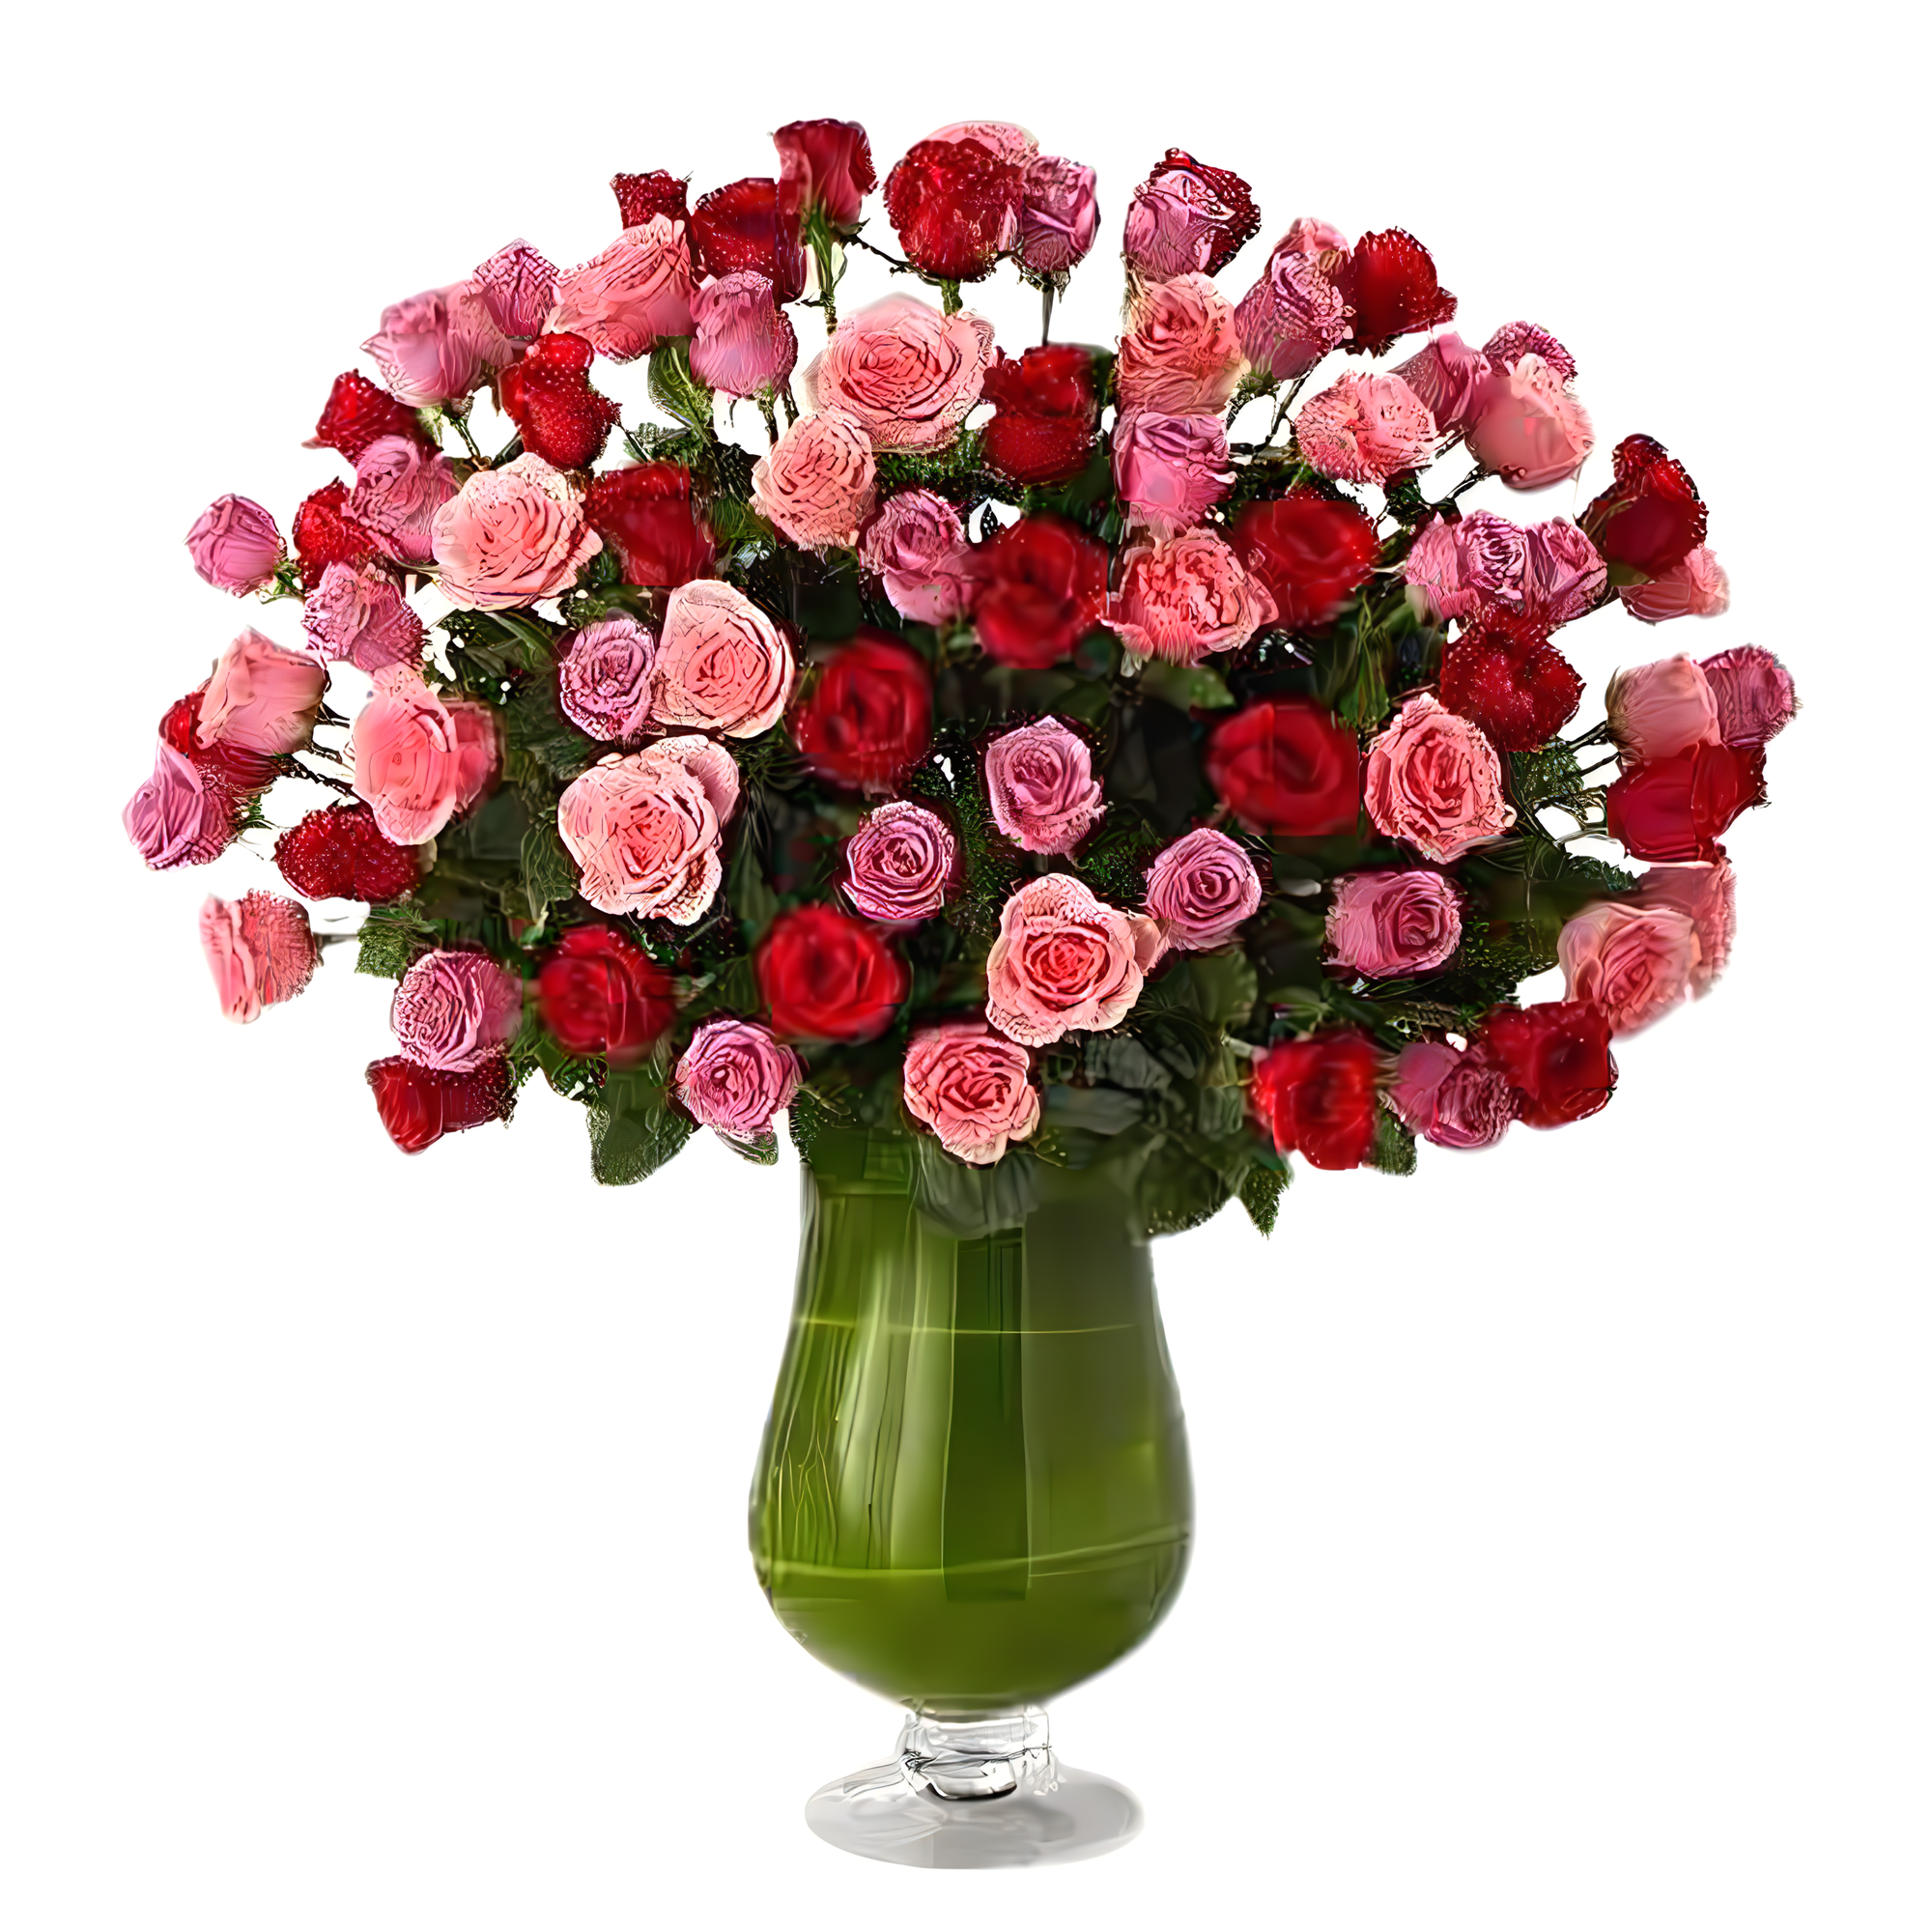 Luxury Rose Bouquet - 24 Premium Red, Pink, & Lavneder Long Stem Roses - Products > Luxury Collection